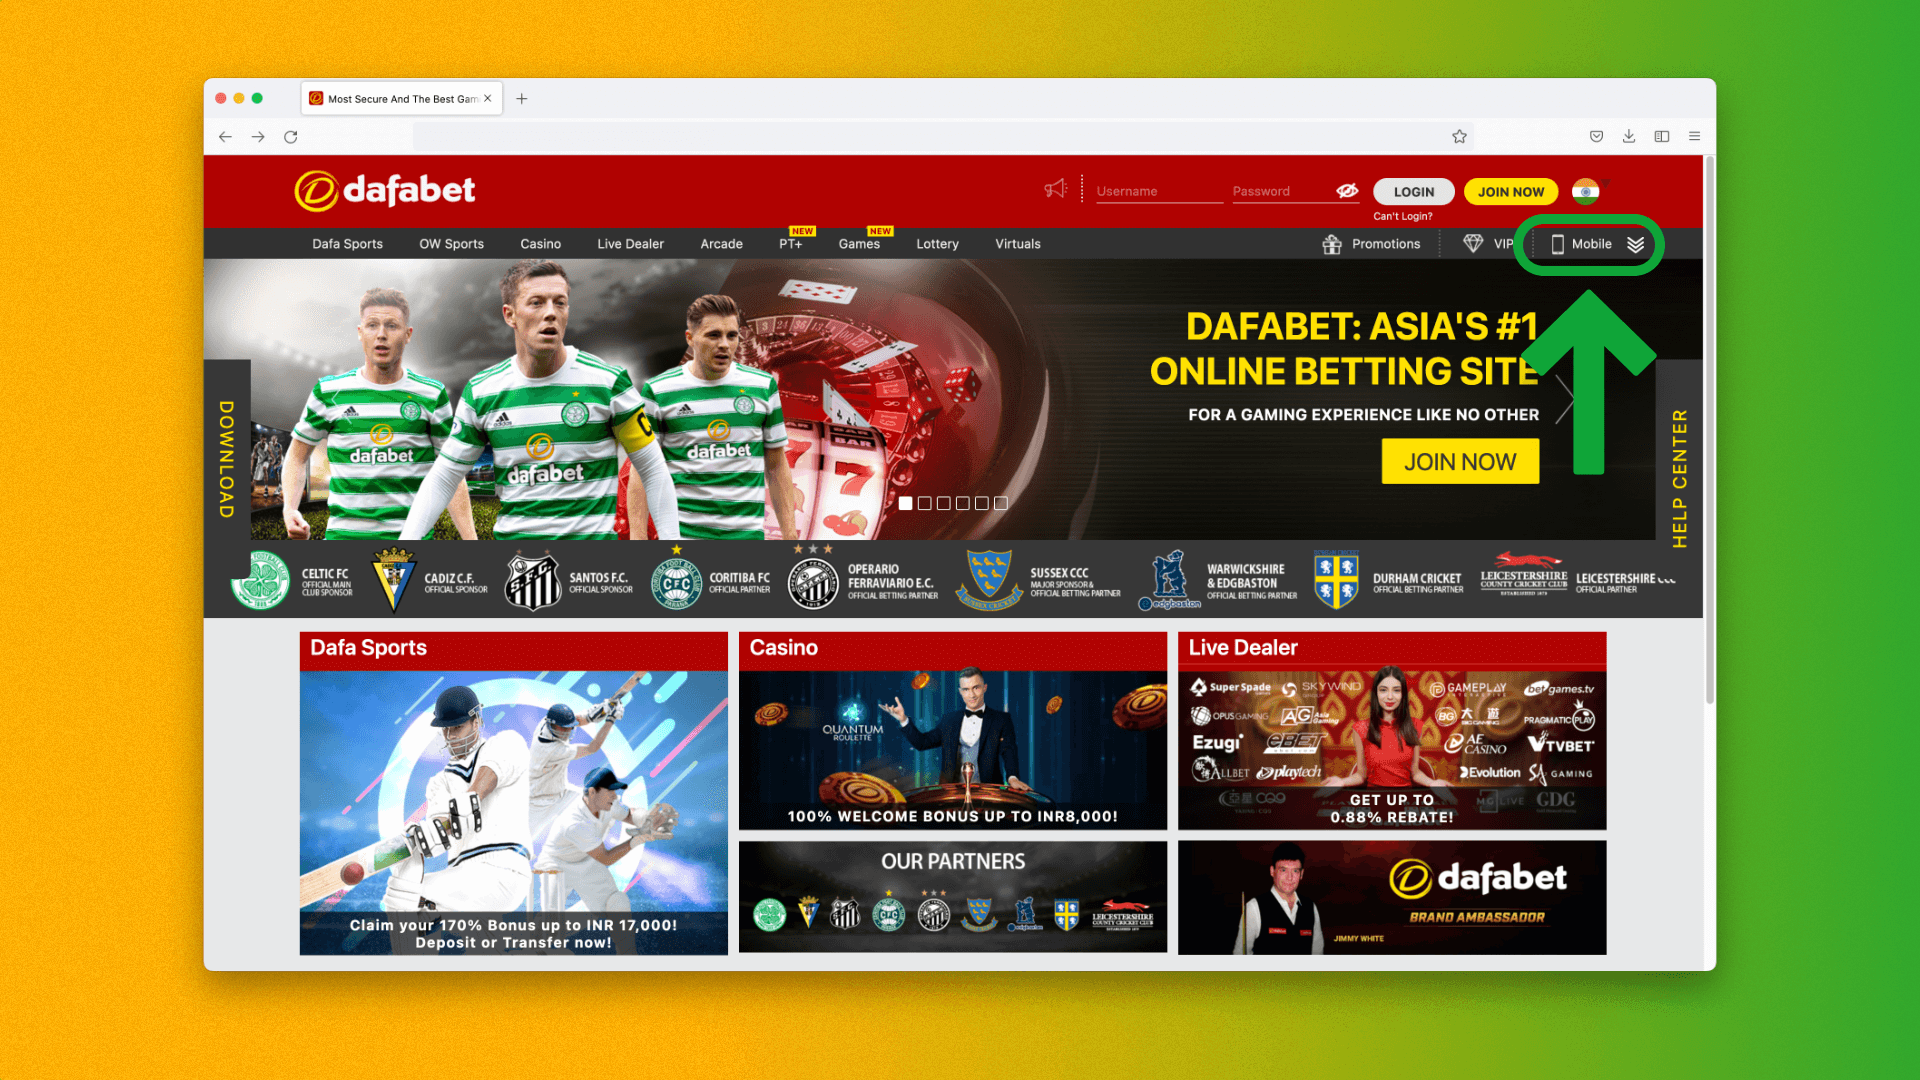 dafabet bookmaker website home page